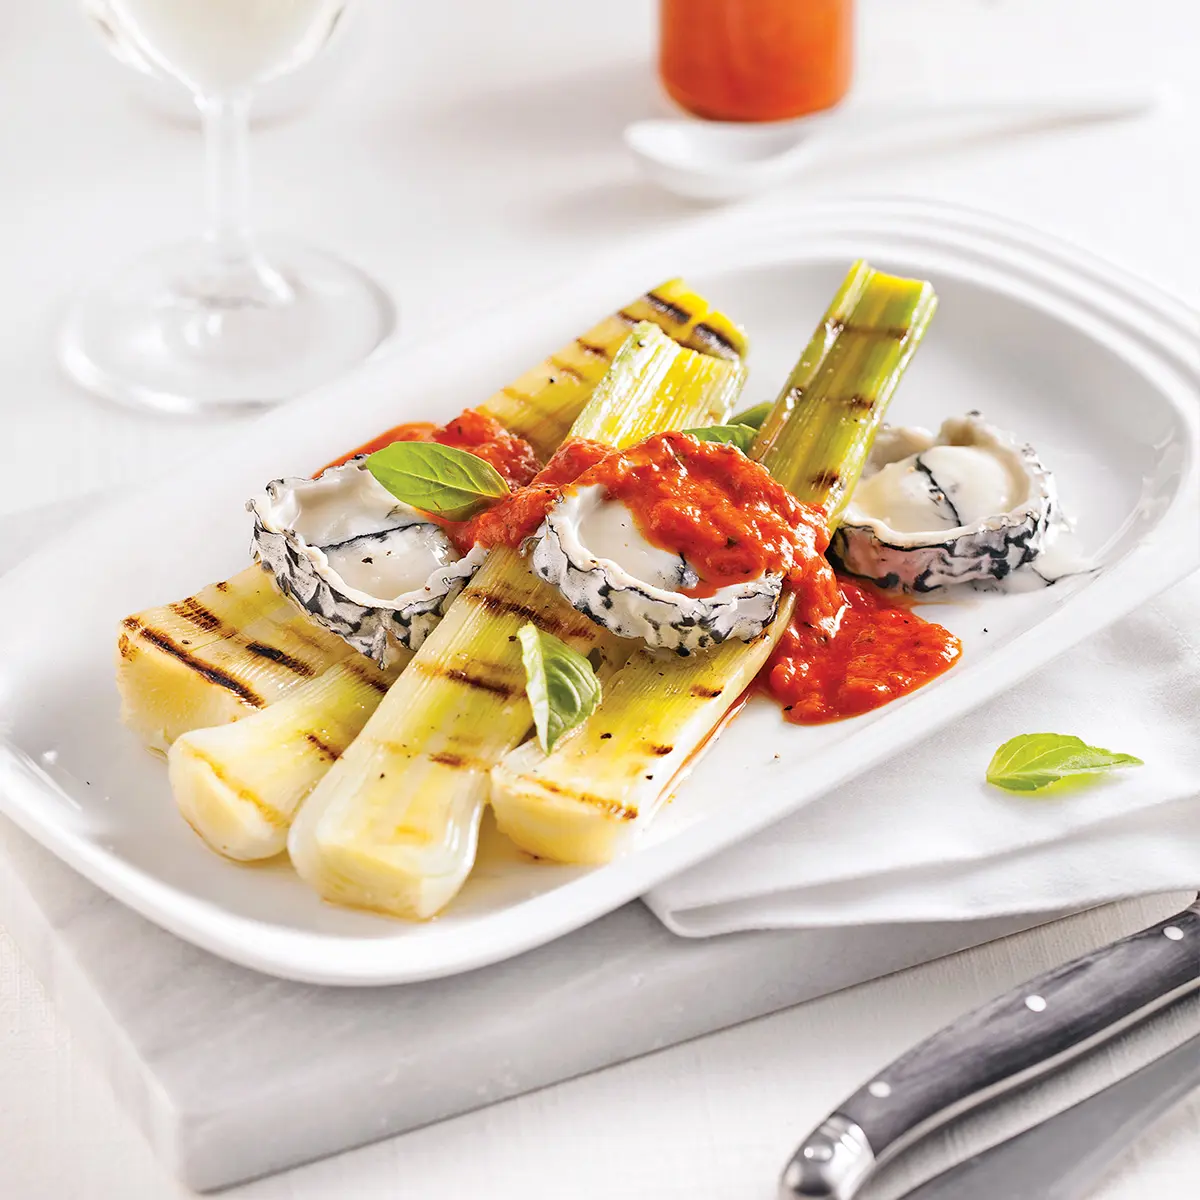 Leeks with goat cheese and red peppers